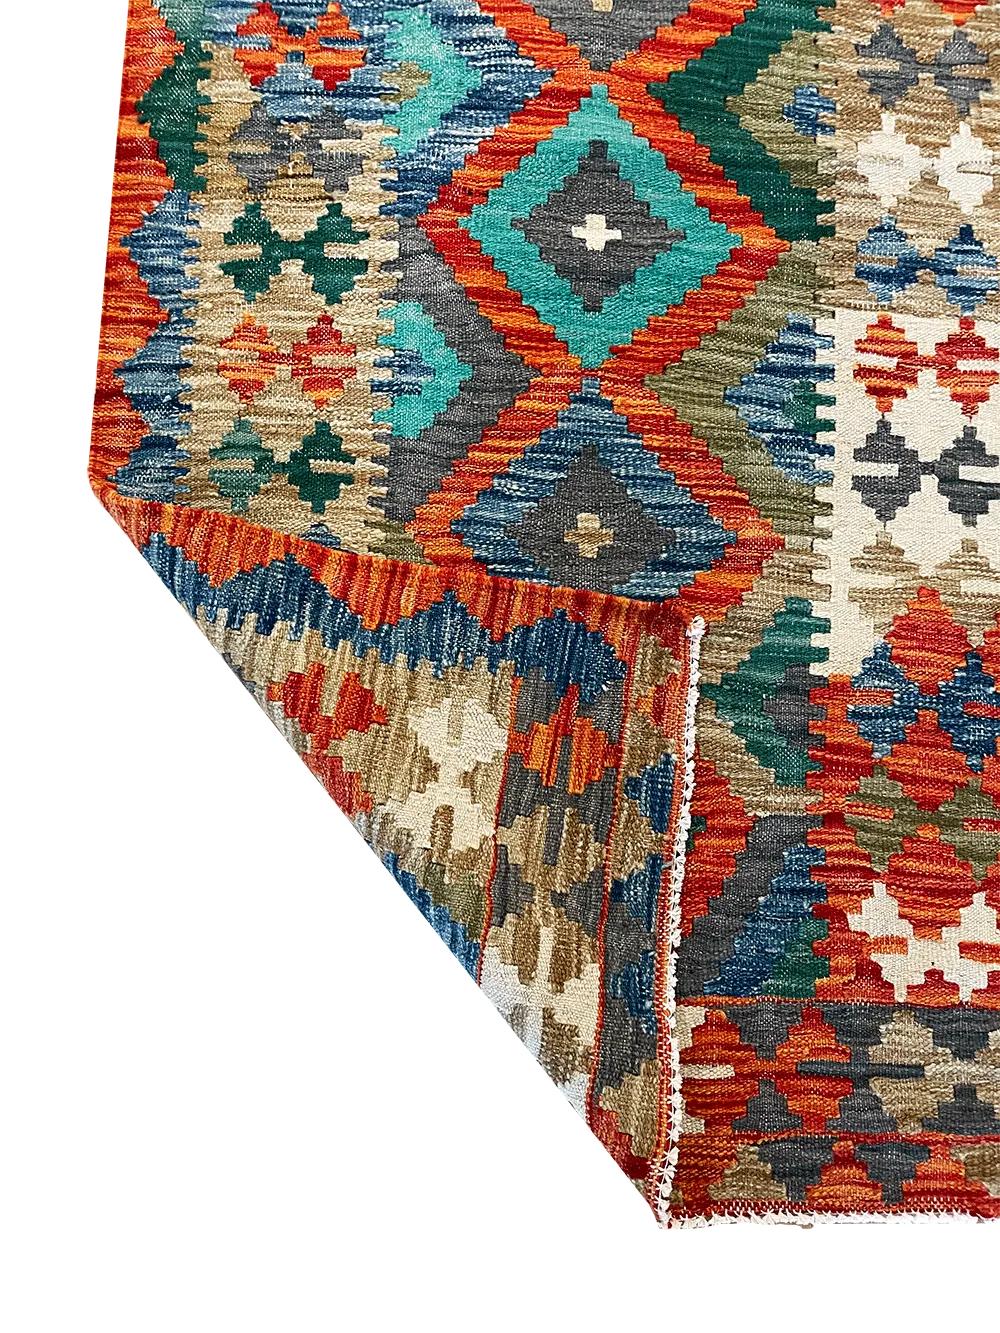 Hand-Woven All Wool Colorful Kilim Runner 2' 6